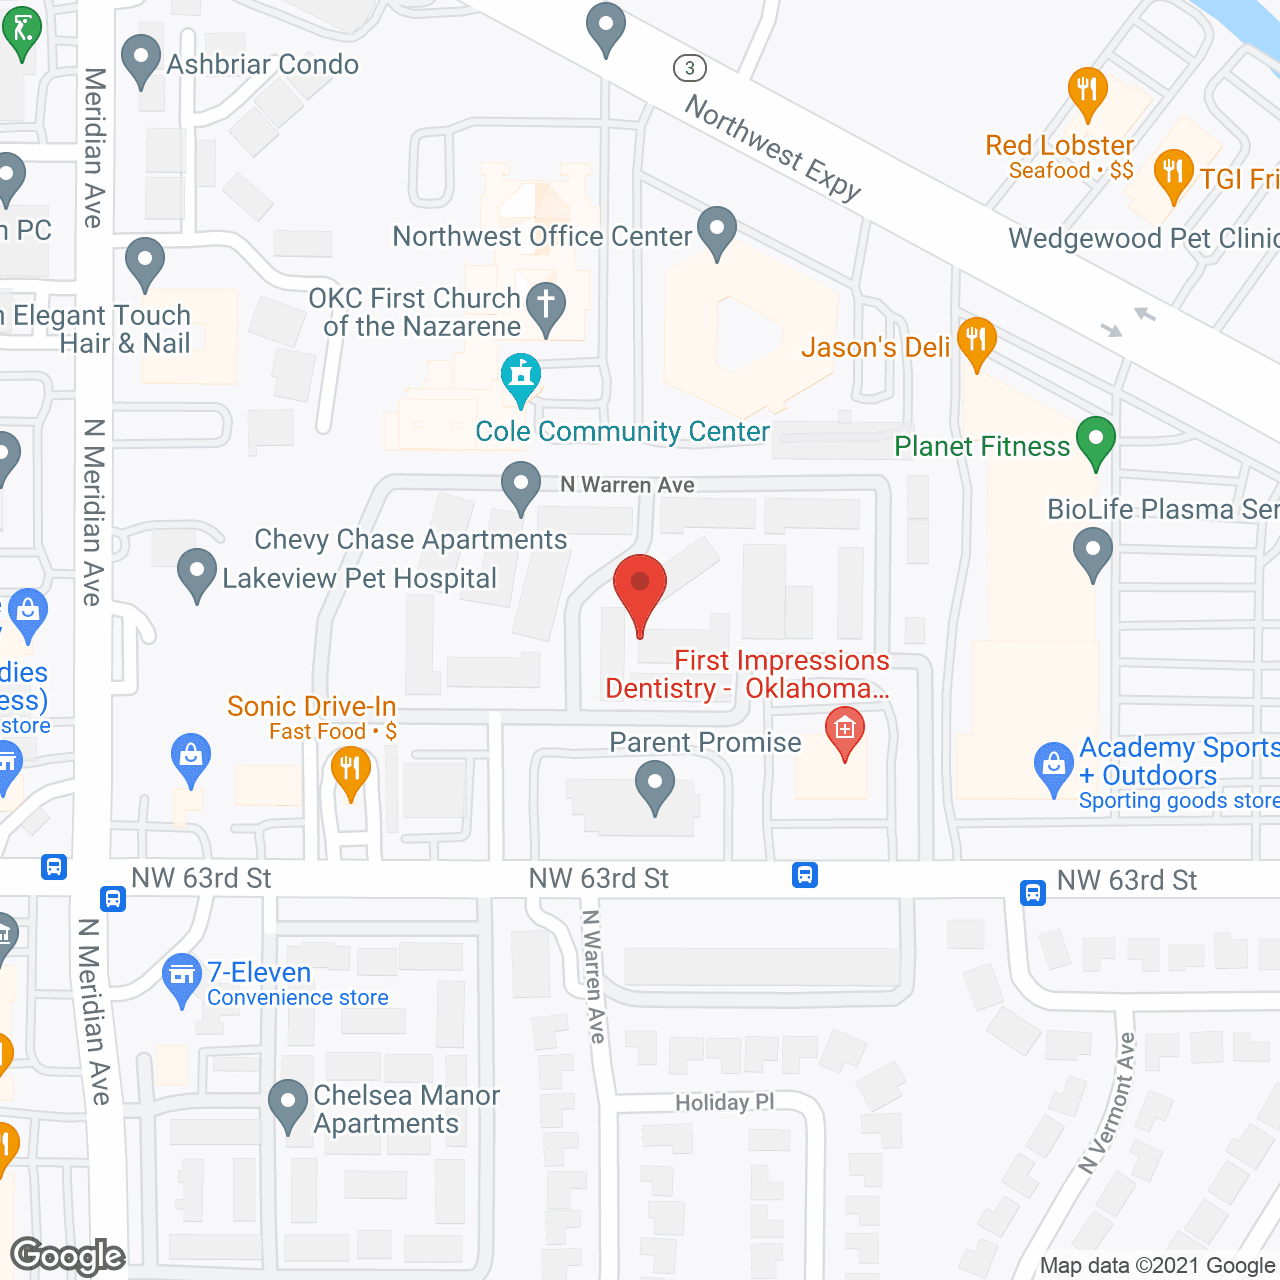 Chevy Chase Apartments in google map